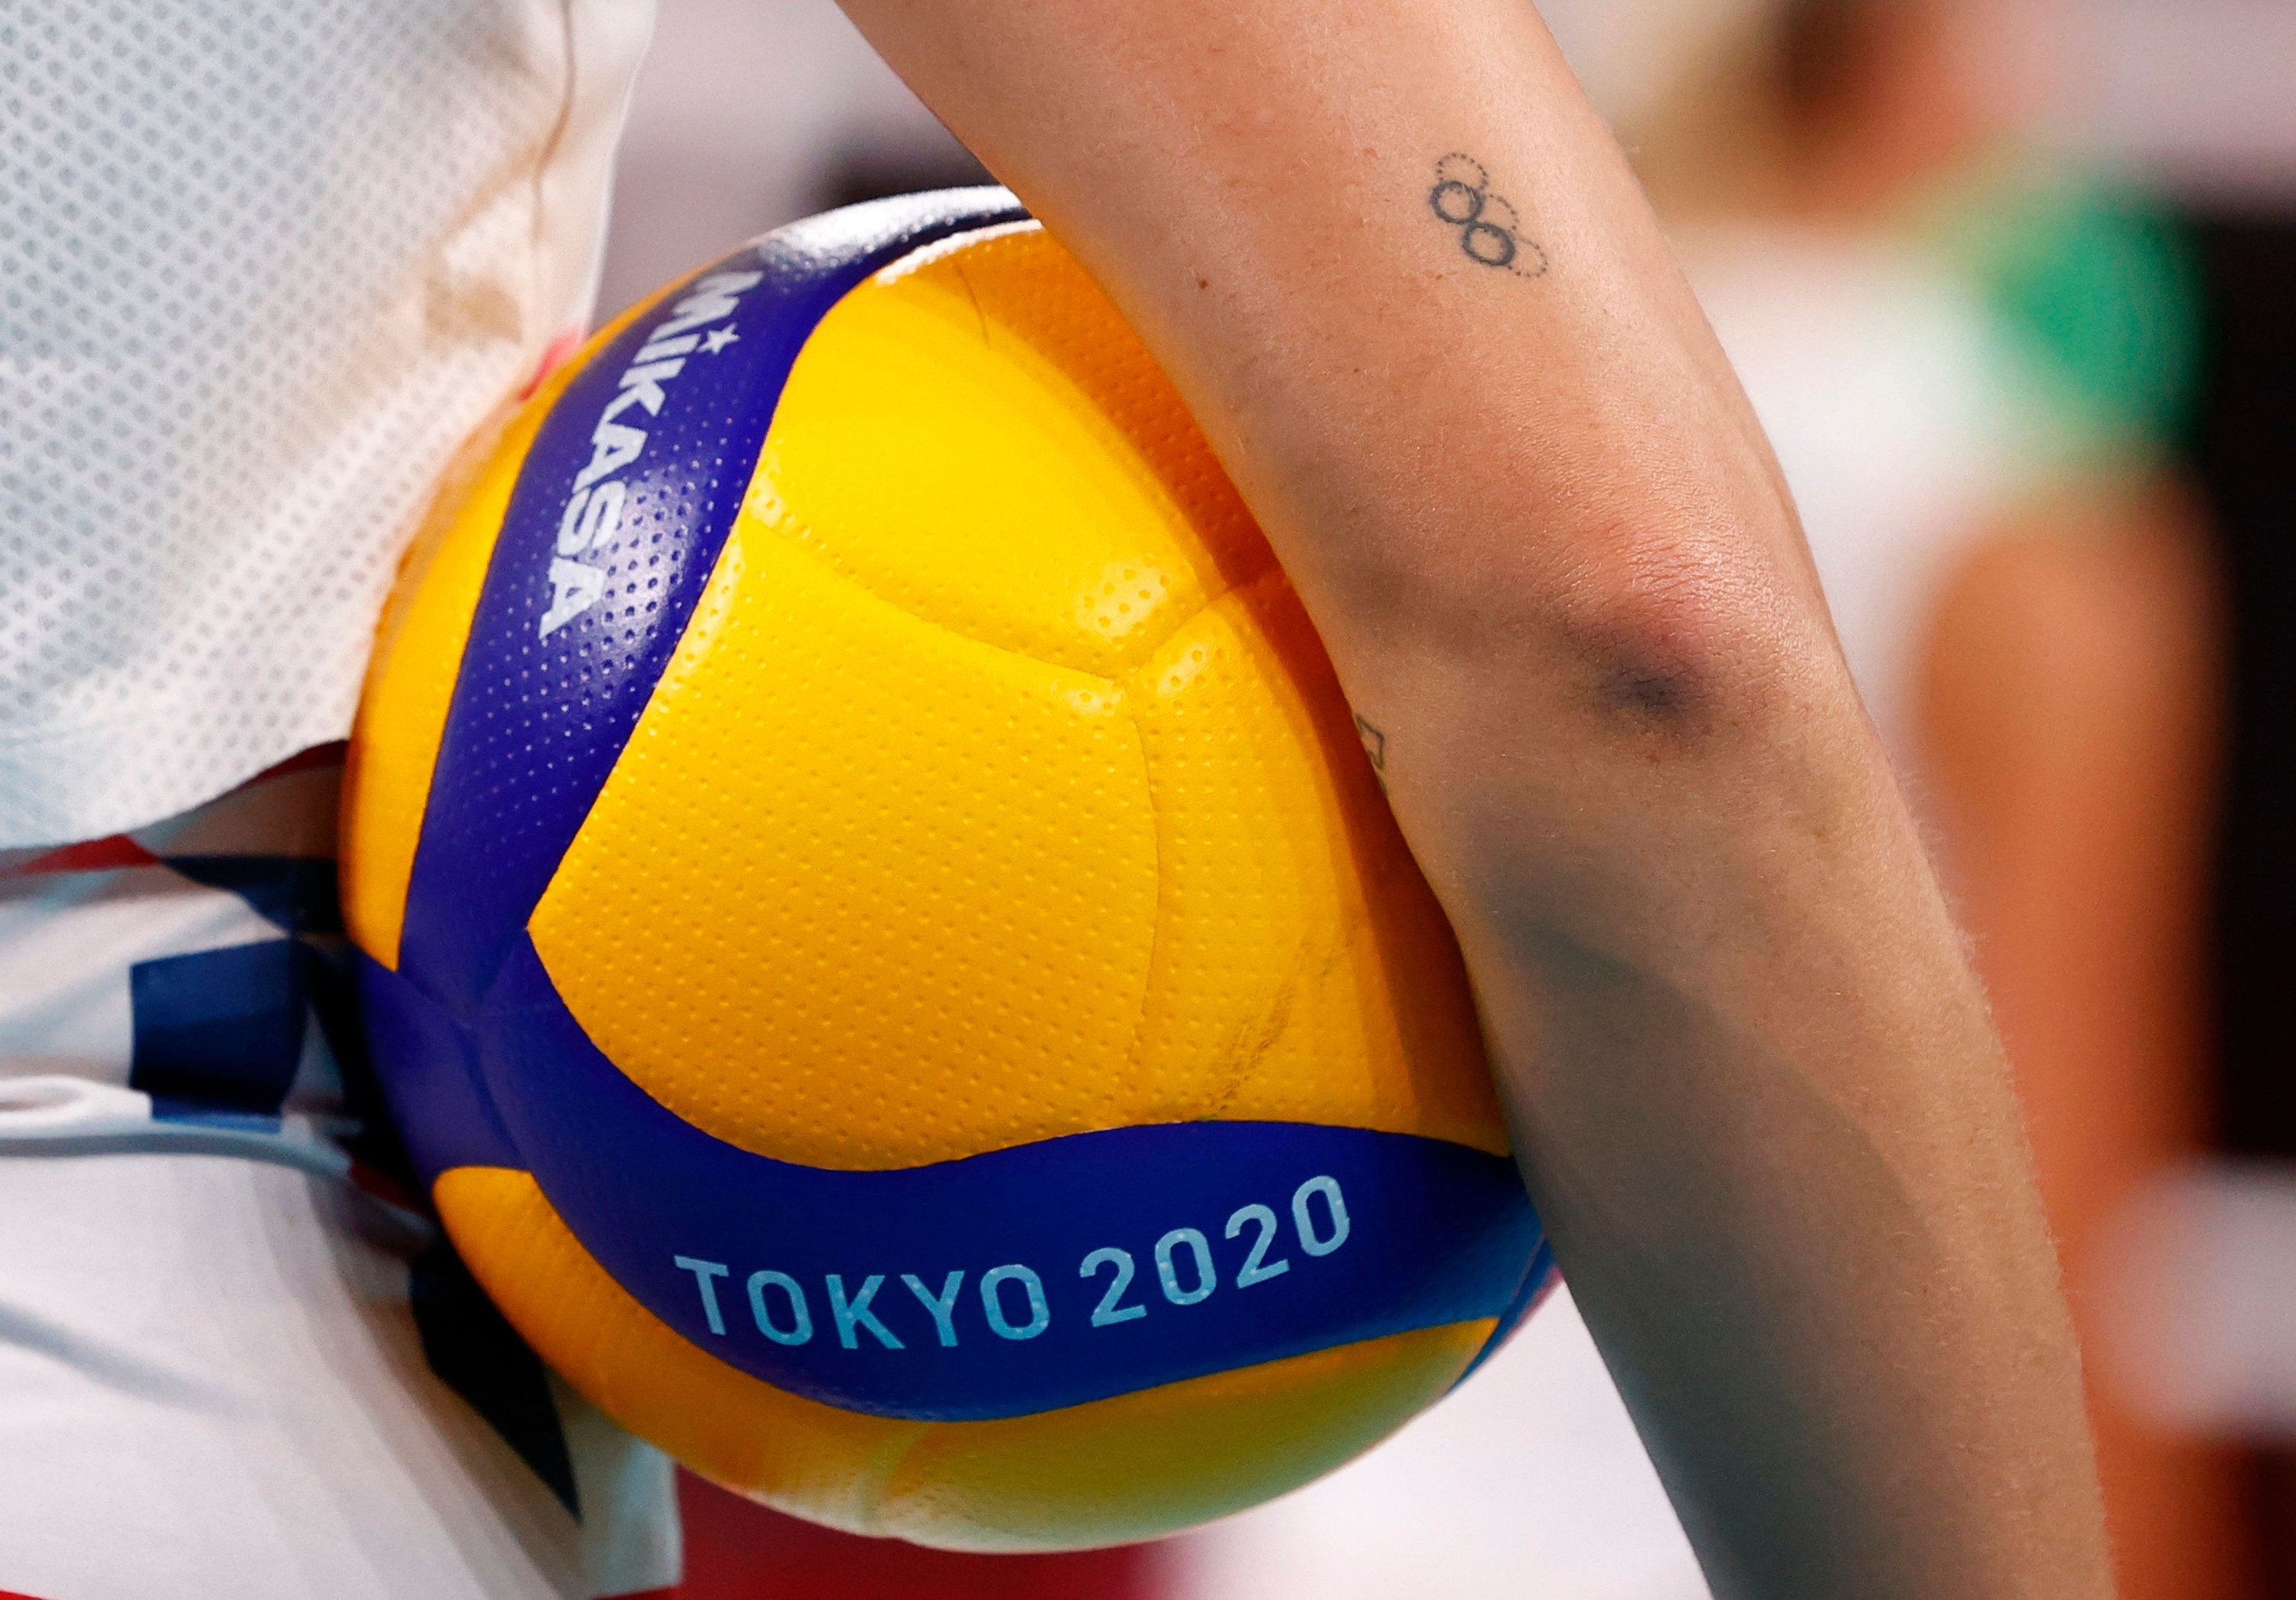 Bright yellow Tokyo 2020 ball is held under the arm of an Olympic athlete